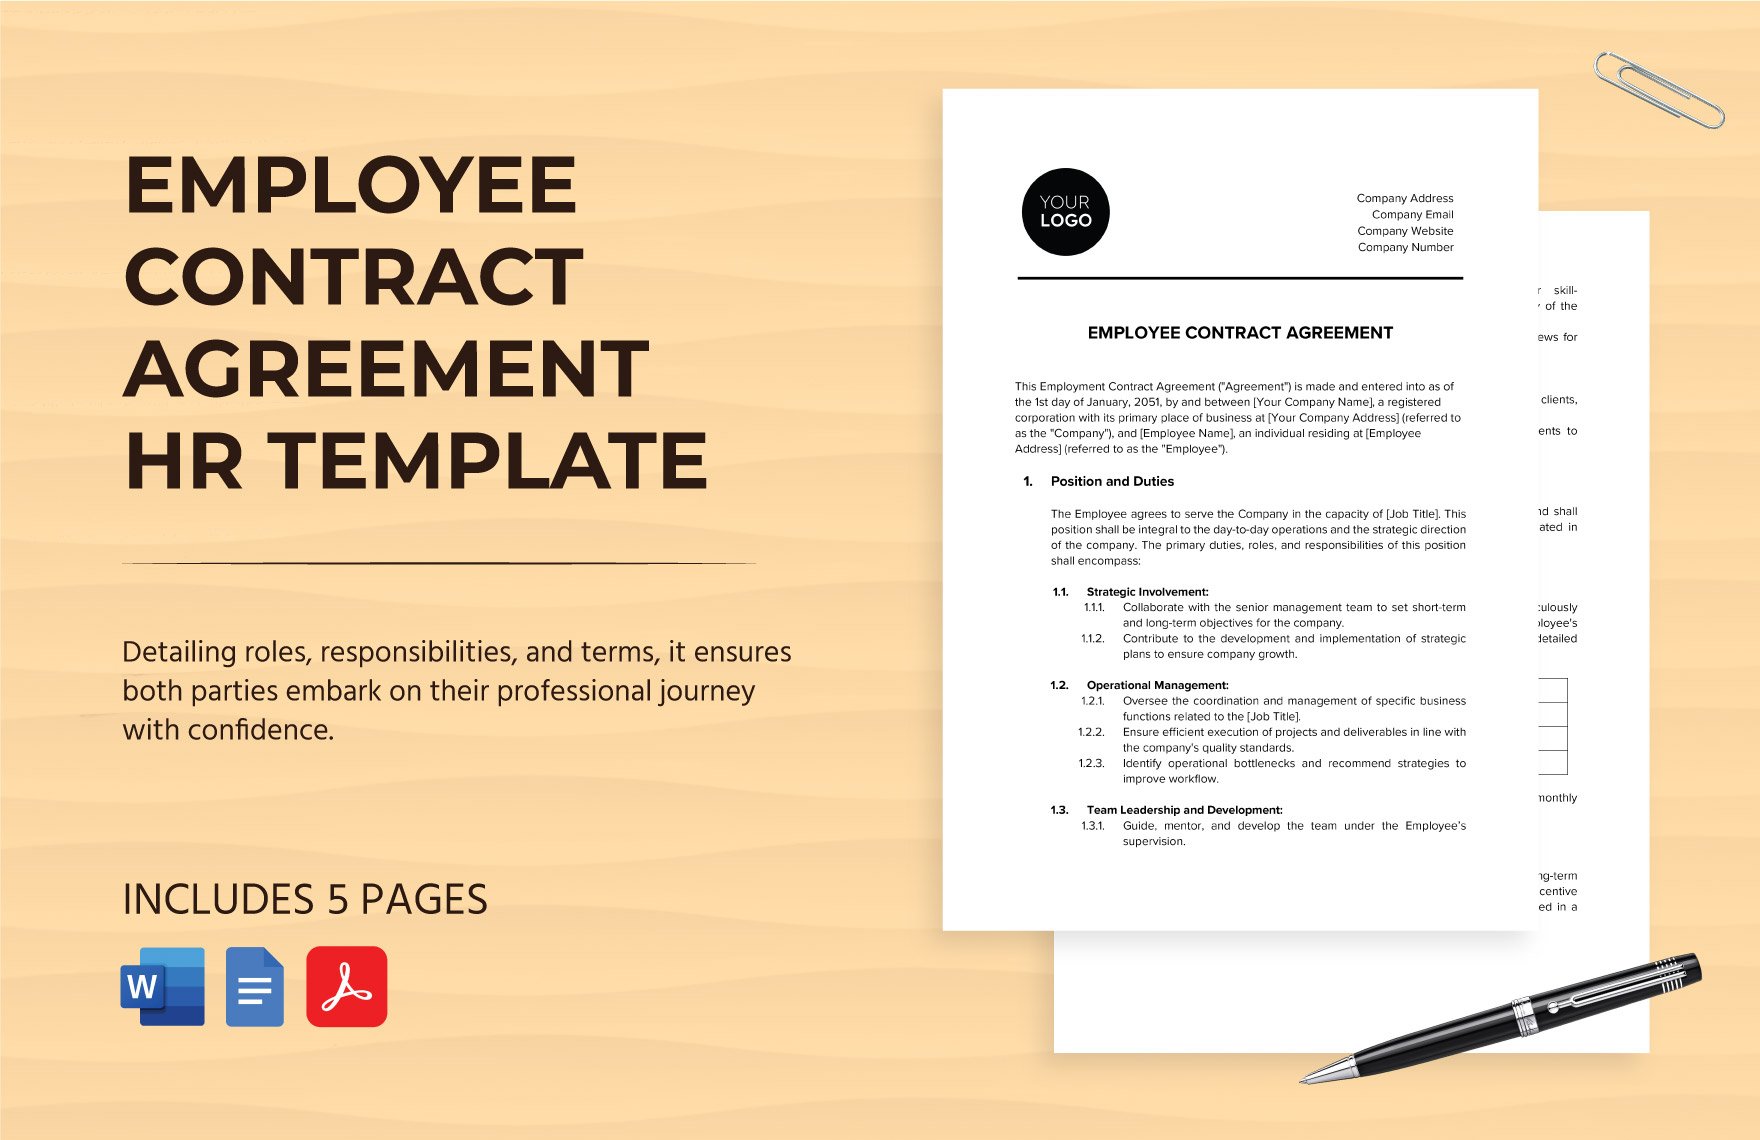 Employee Contract Agreement HR Template